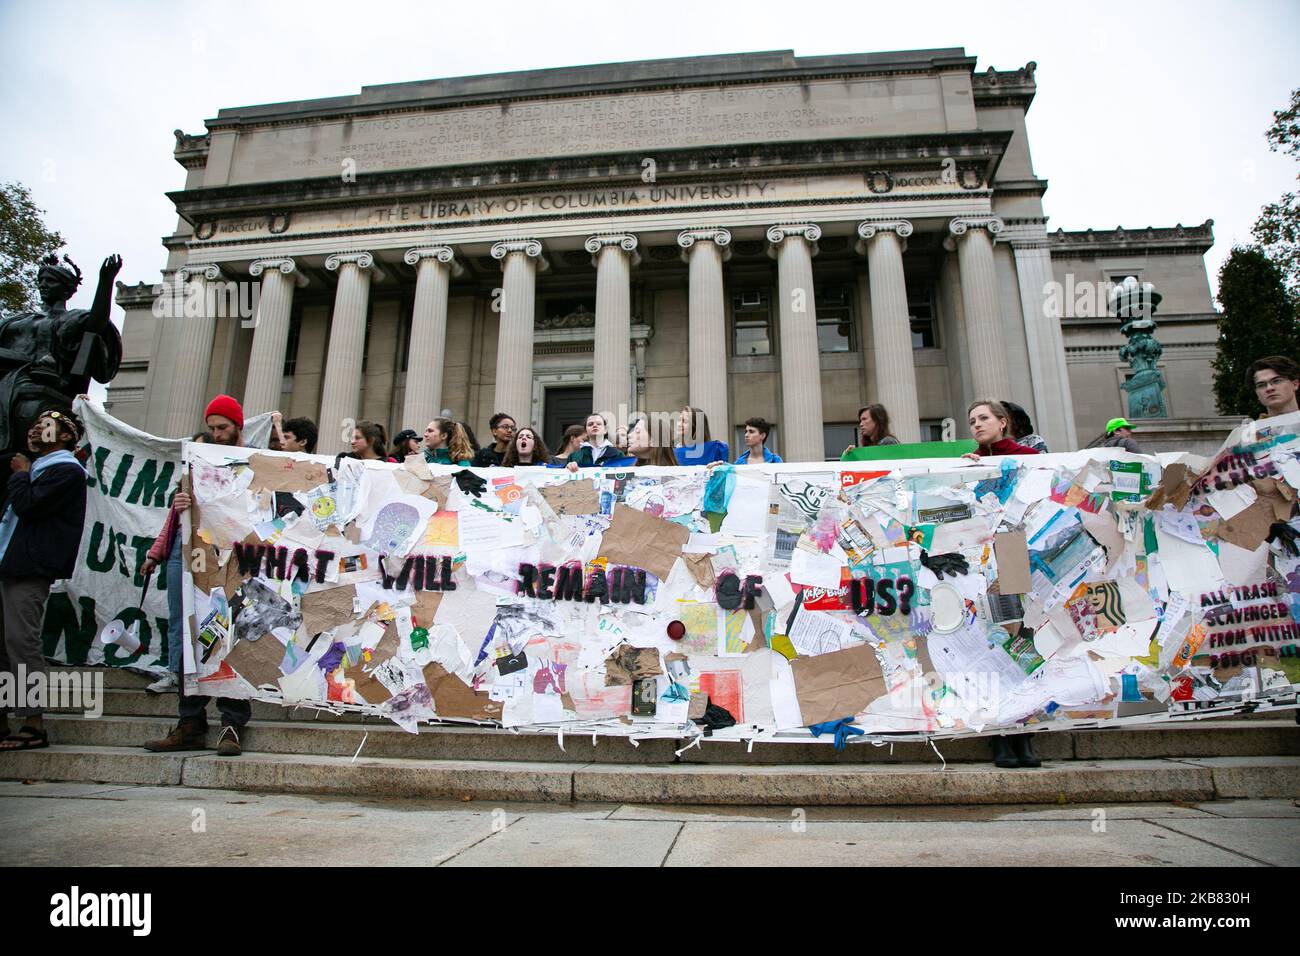 Students and activists occupied the Low Memorial Library at Columbia University on October 2019 in New York, US, 10 to urge staff and alumni to take concrete action to address the impending climate crisis. This action comes as Global Extinction Rebellion protests have erupted worldwide using nonviolent direct action and peaceful civil disobedience to disrupt business-as-usual to urge government officials, media organizations, and universities to act to save the climate. (Photo by Karla Ann Cote/NurPhoto) Stock Photo